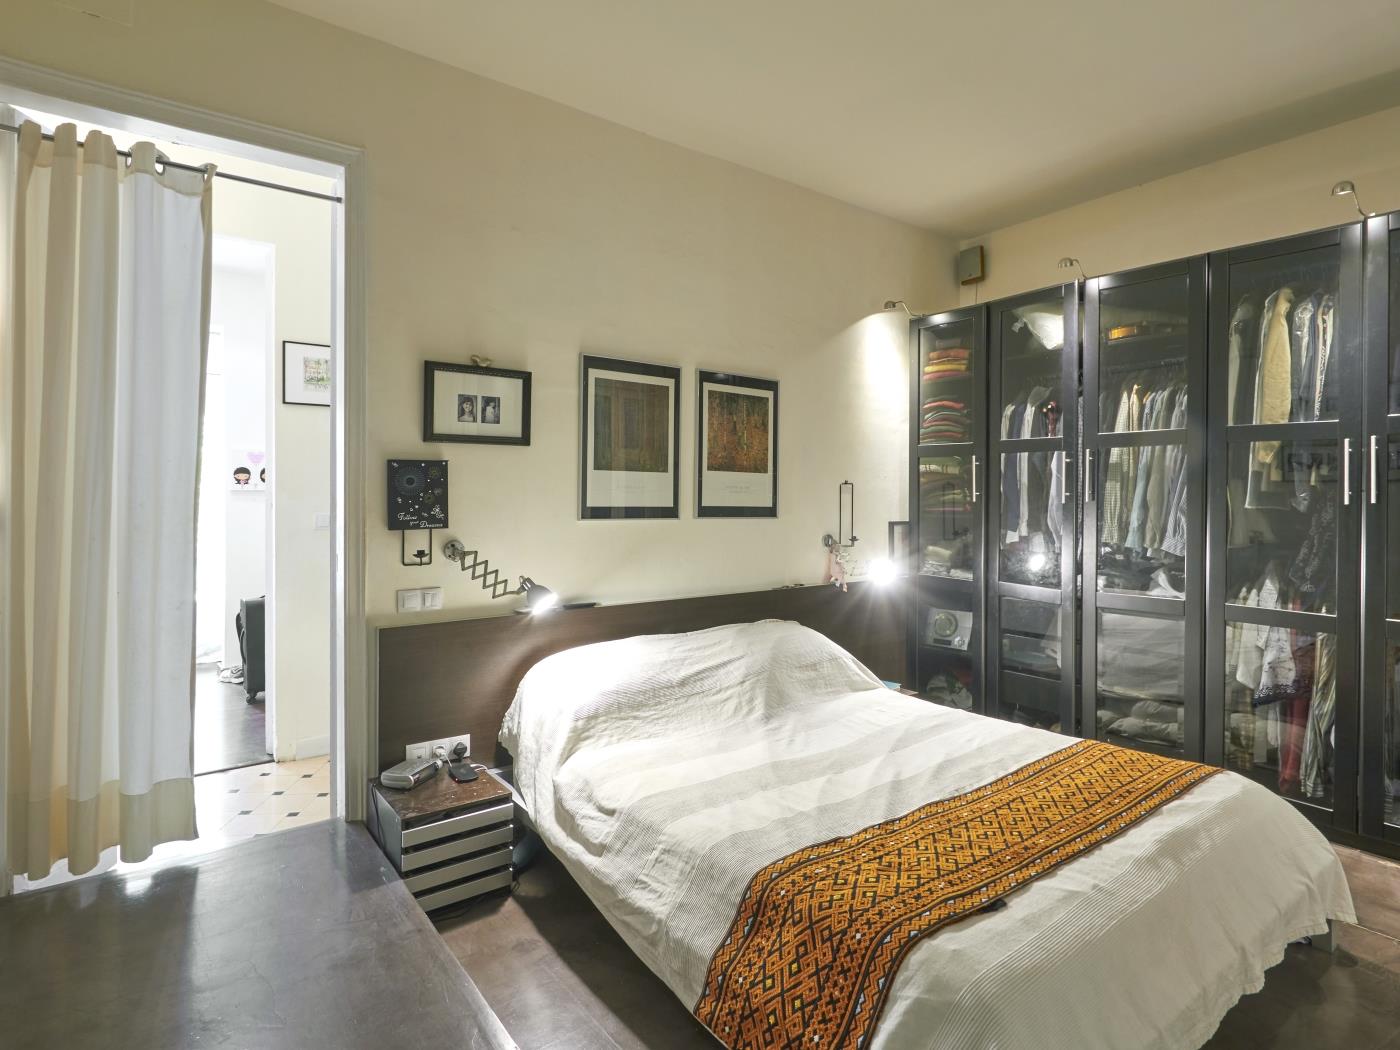 FOR SALE: Bright apartment with terrace in l'Eixample - Price: 749.000 € - My Space Barcelona Apartments